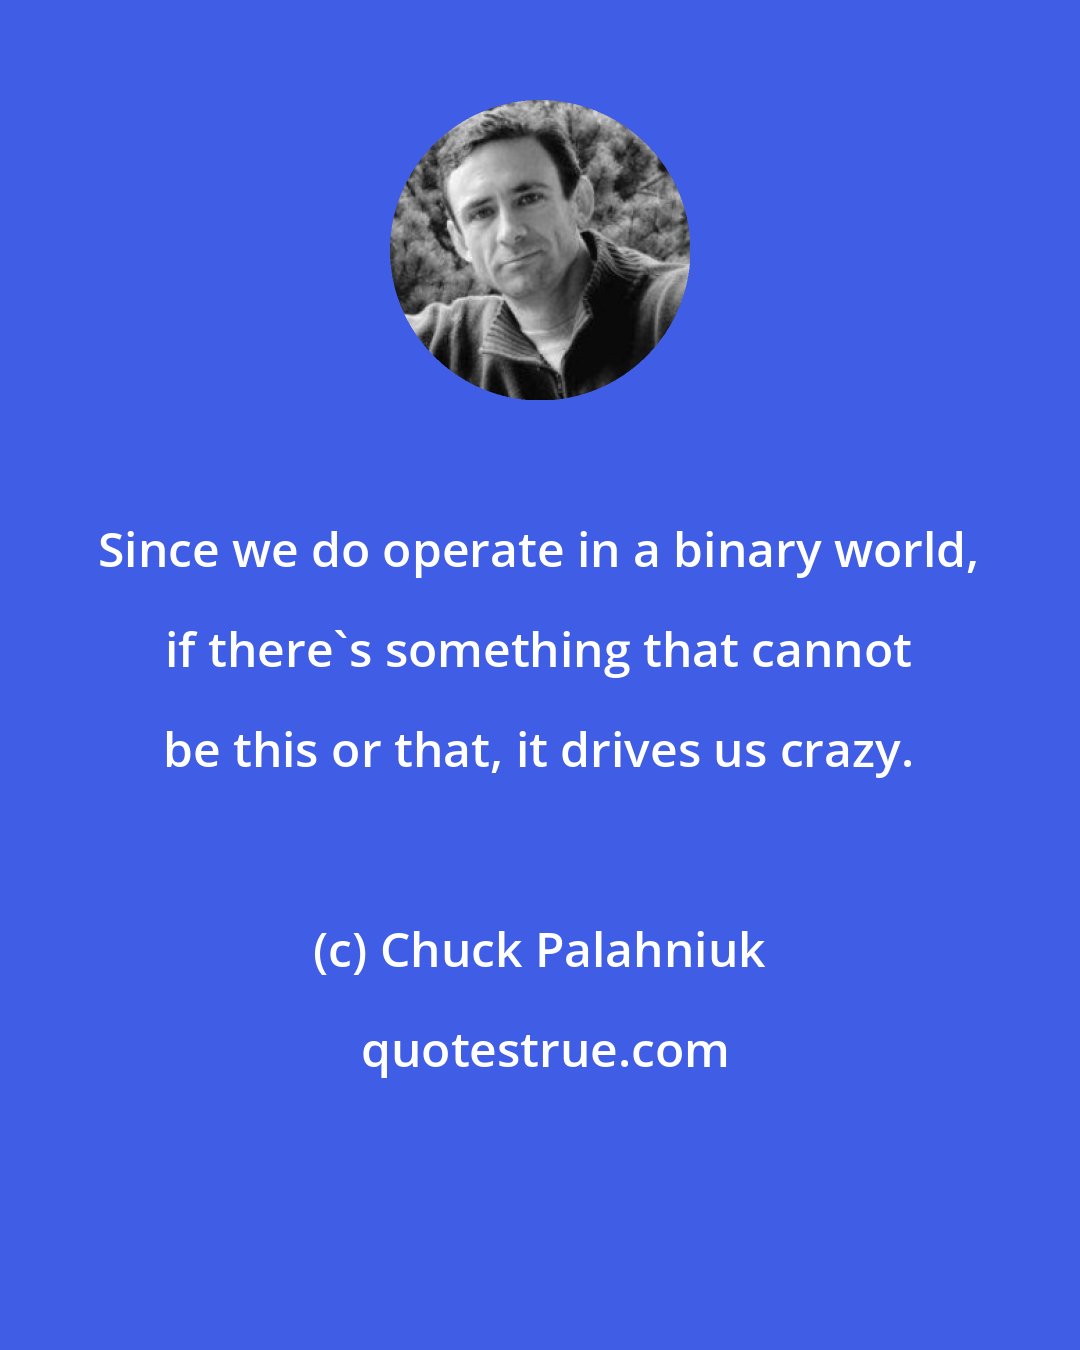 Chuck Palahniuk: Since we do operate in a binary world, if there's something that cannot be this or that, it drives us crazy.